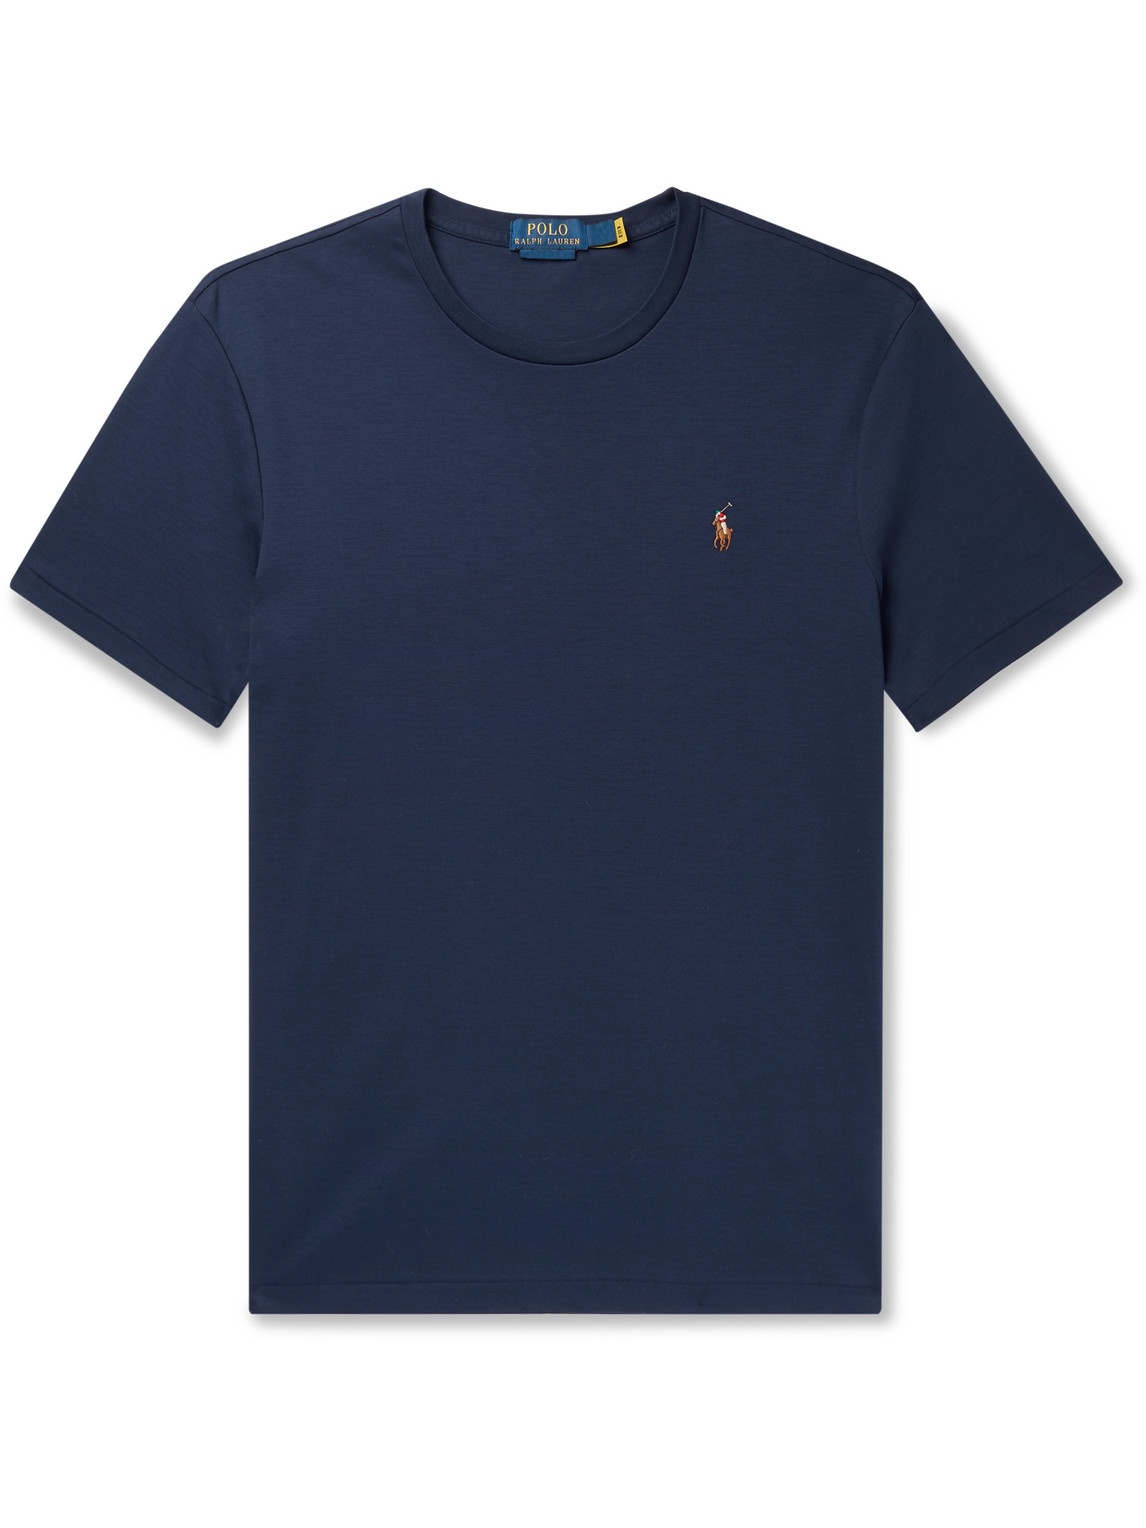 Polo Ralph Lauren Polo-embroidered Cotton-jersey T-shirt In Dark ModeSens